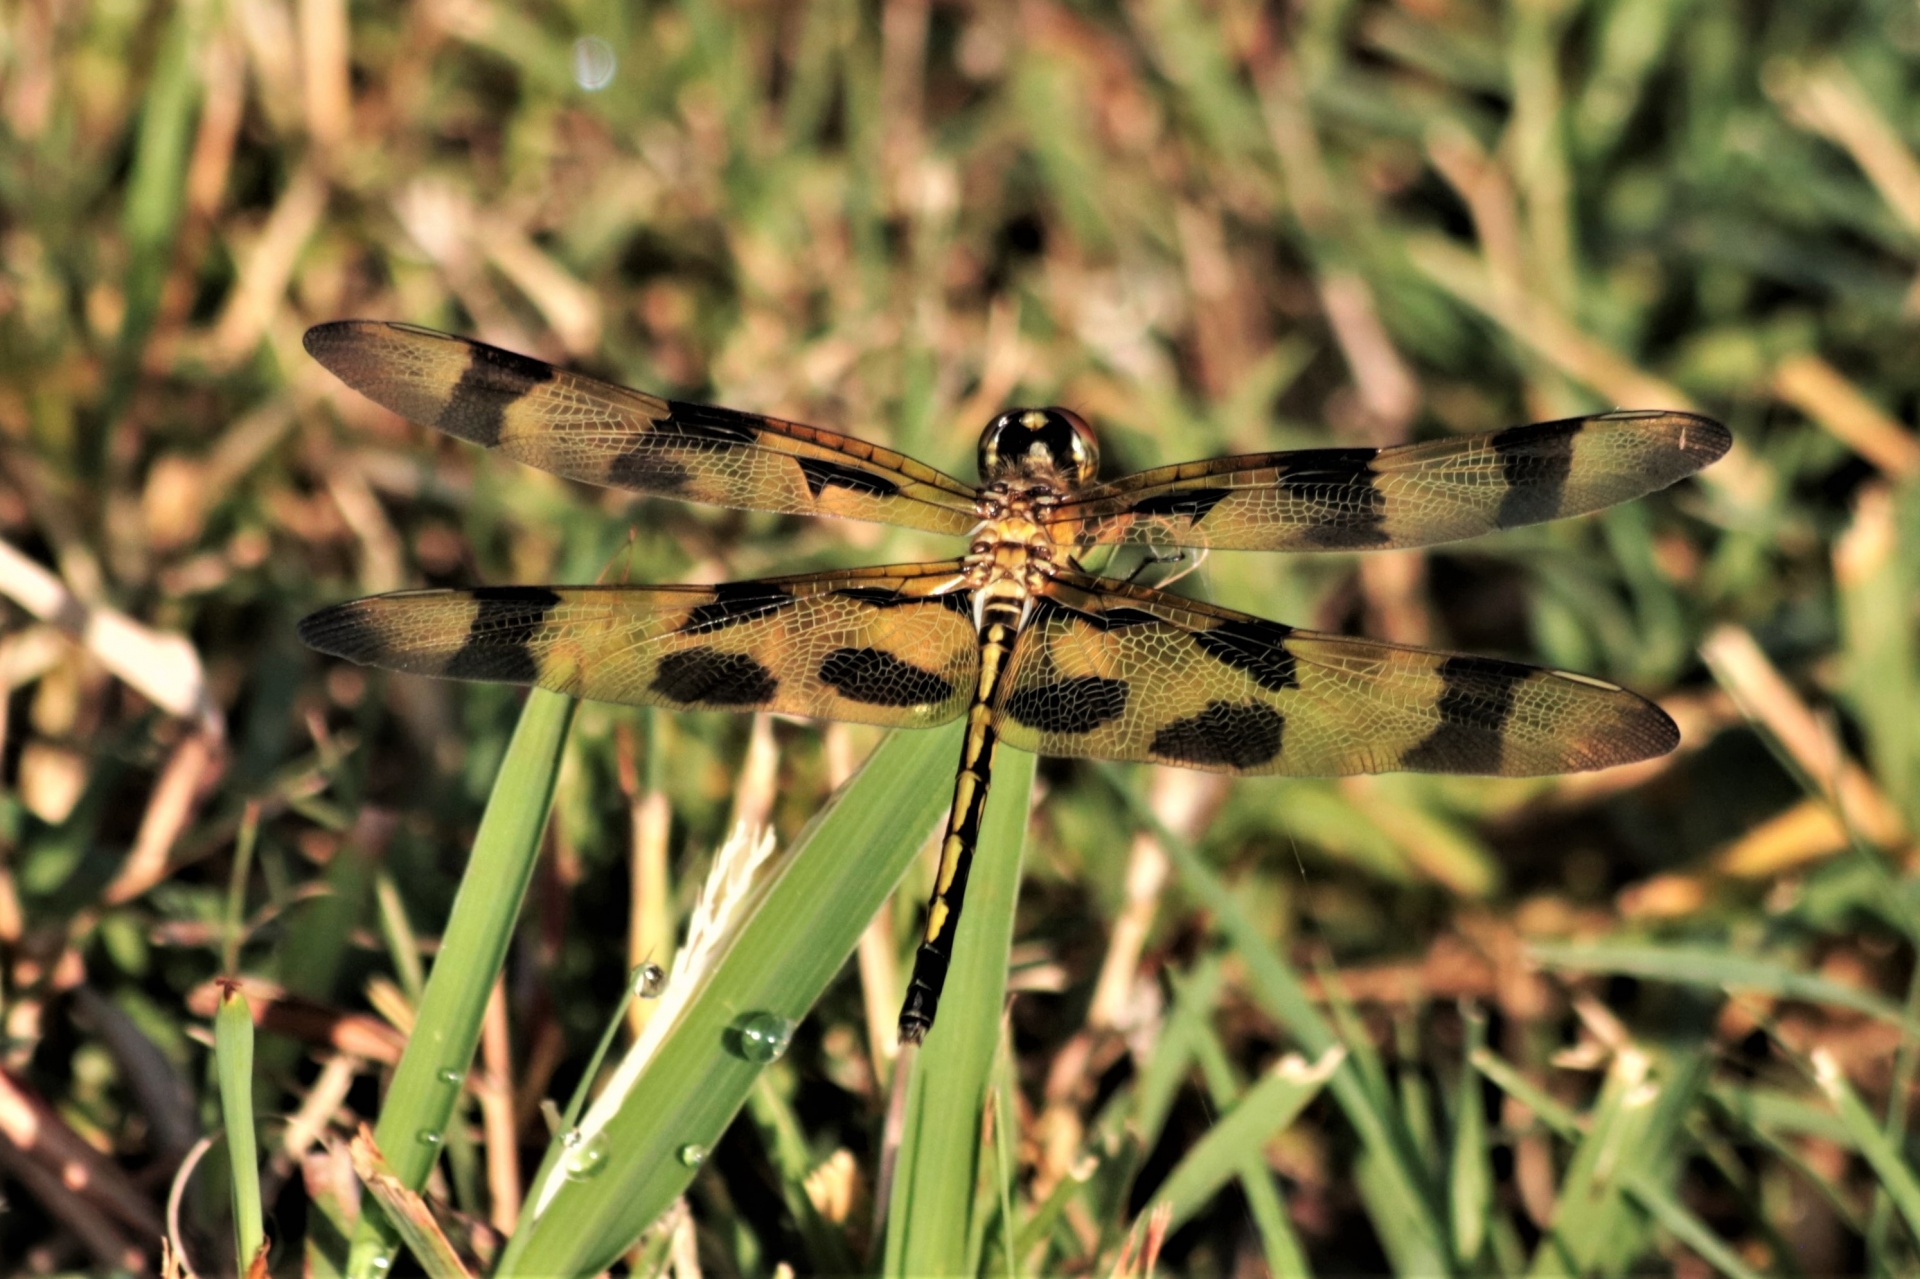 Close-up of a orange and black Halloween pennant dragonfly sitting on a green blade of grass.